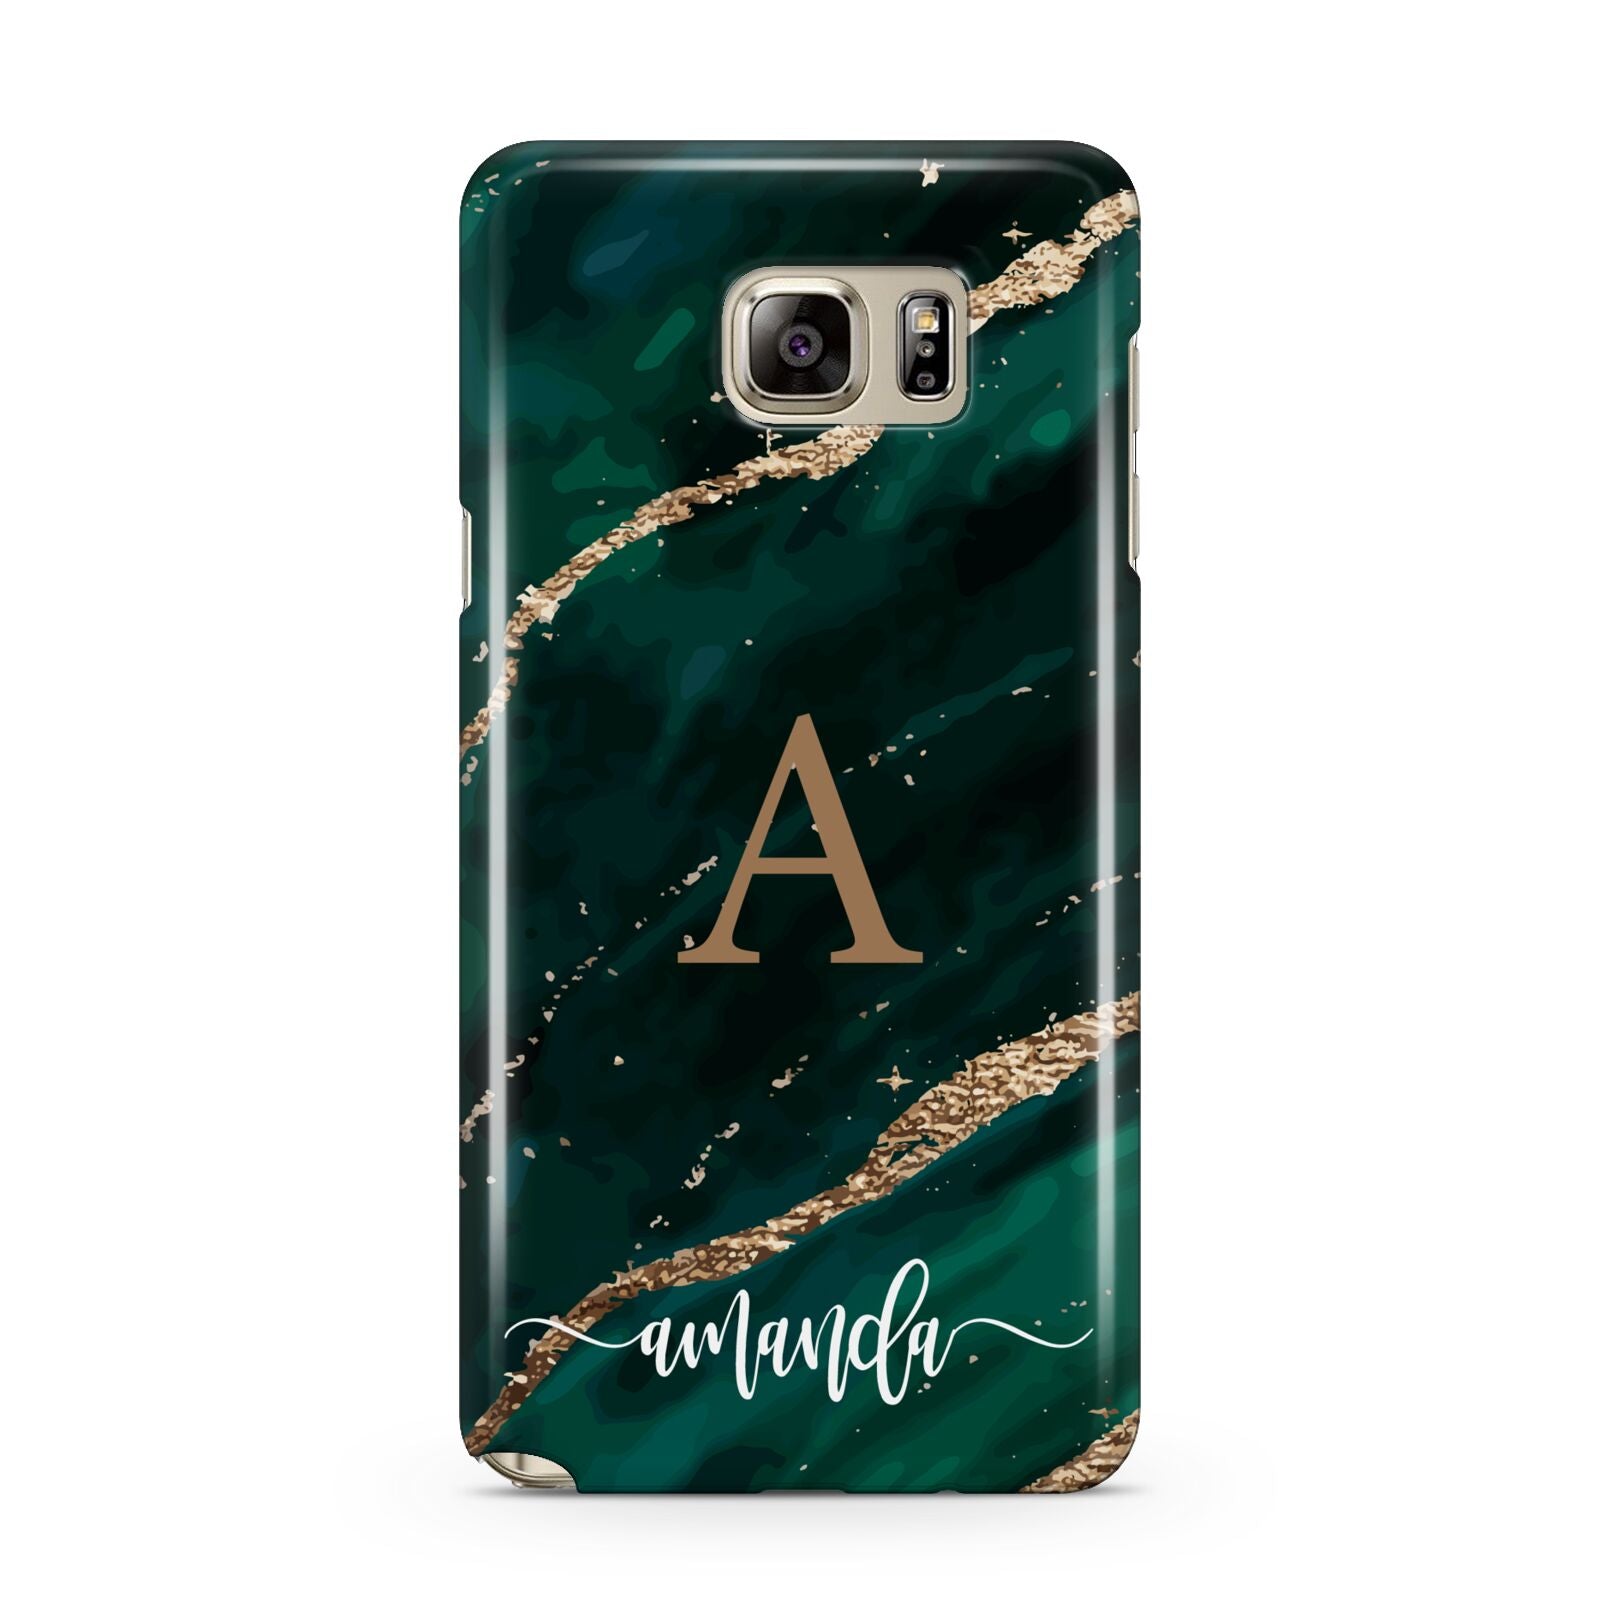 Green Marble Samsung Galaxy Note 5 Case